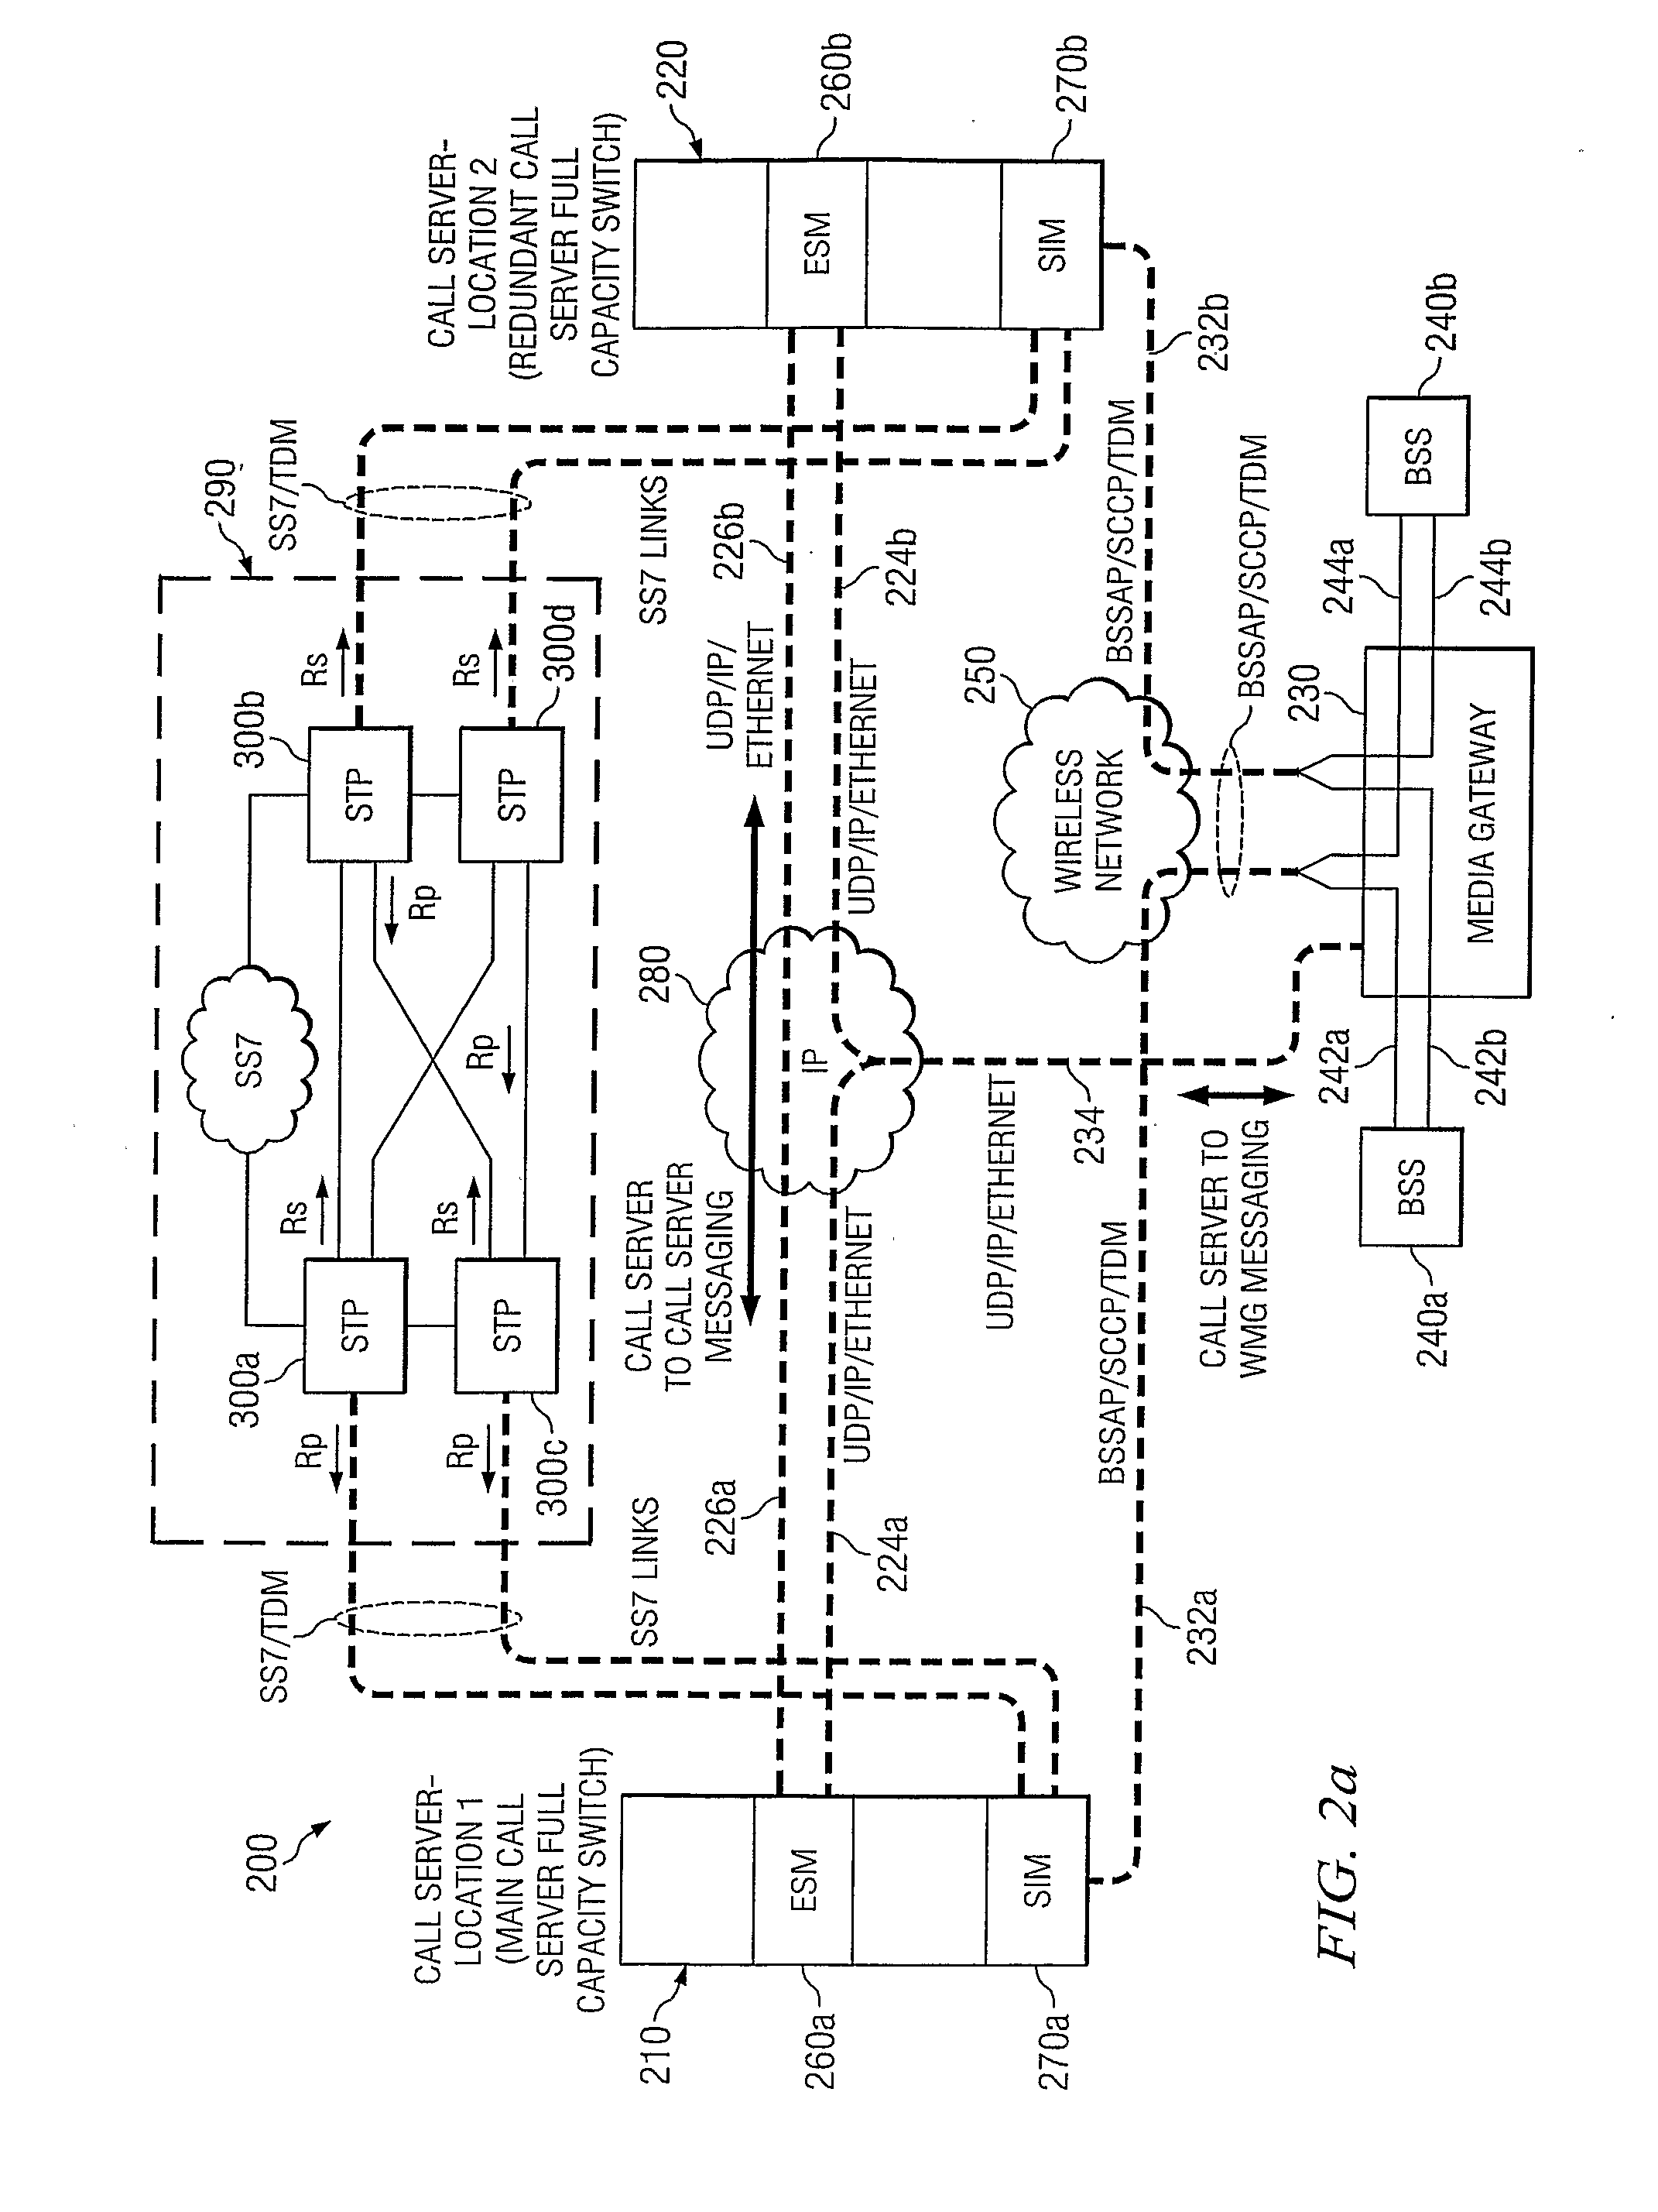 Method and system for providing availability and reliability for a telecommunication network entity